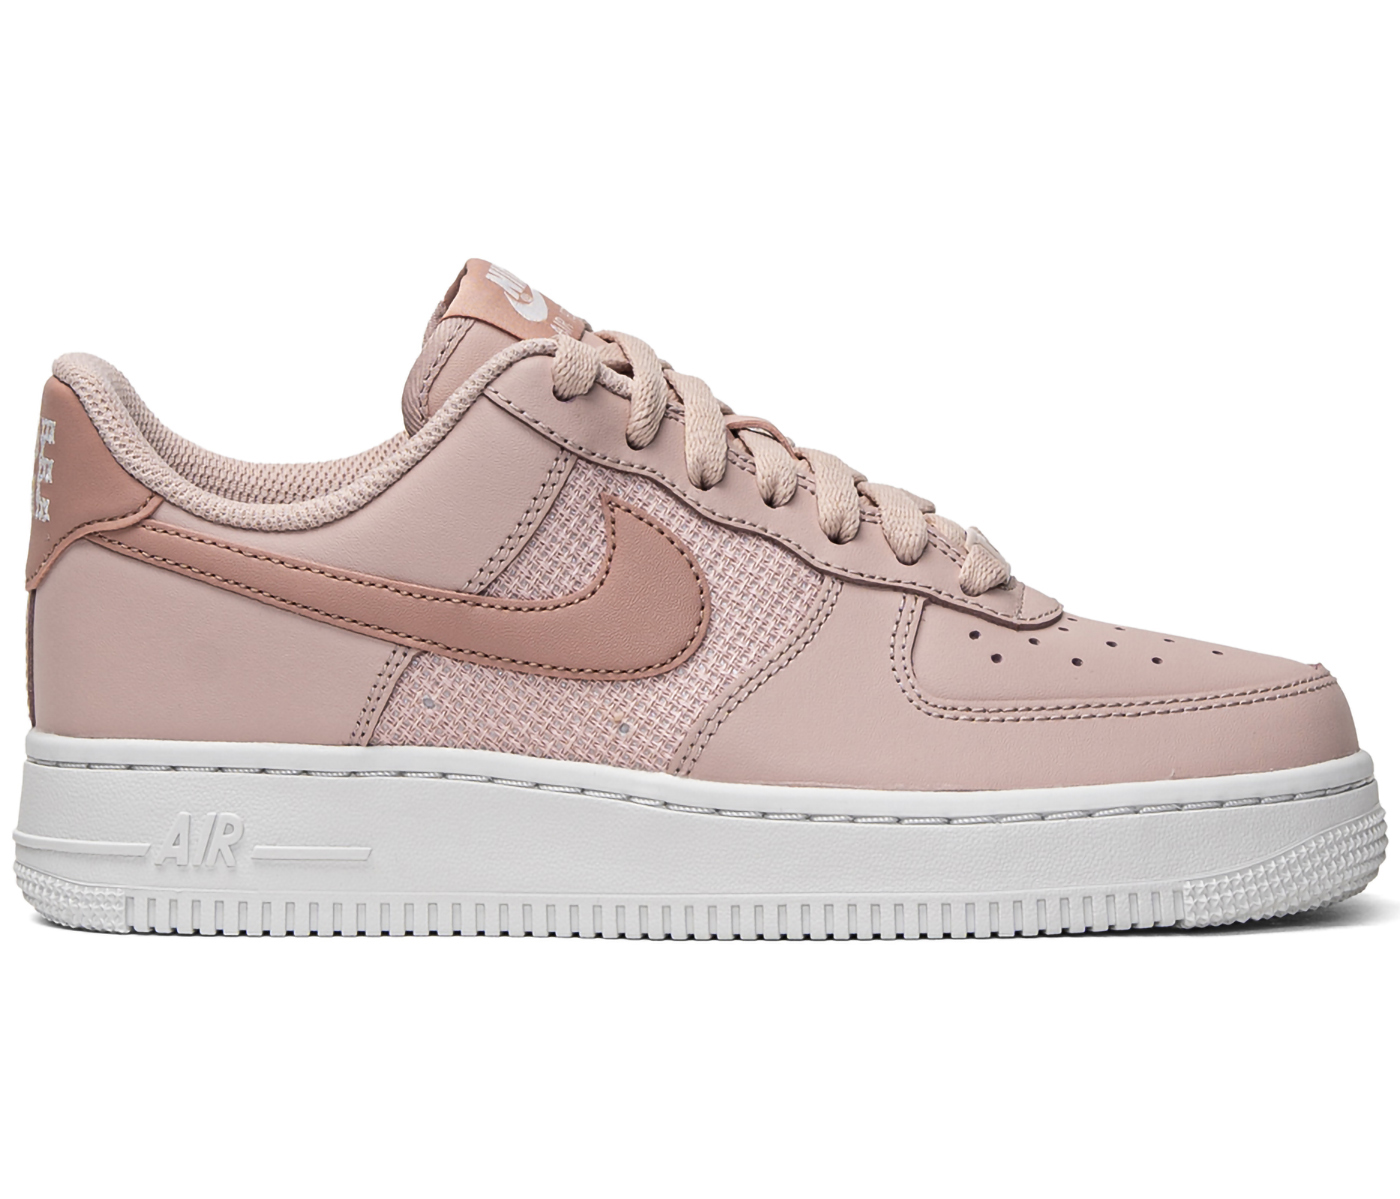 Nike Air Force 1 Low '07 ESS Cross Stitch Pink Oxford (Women's)